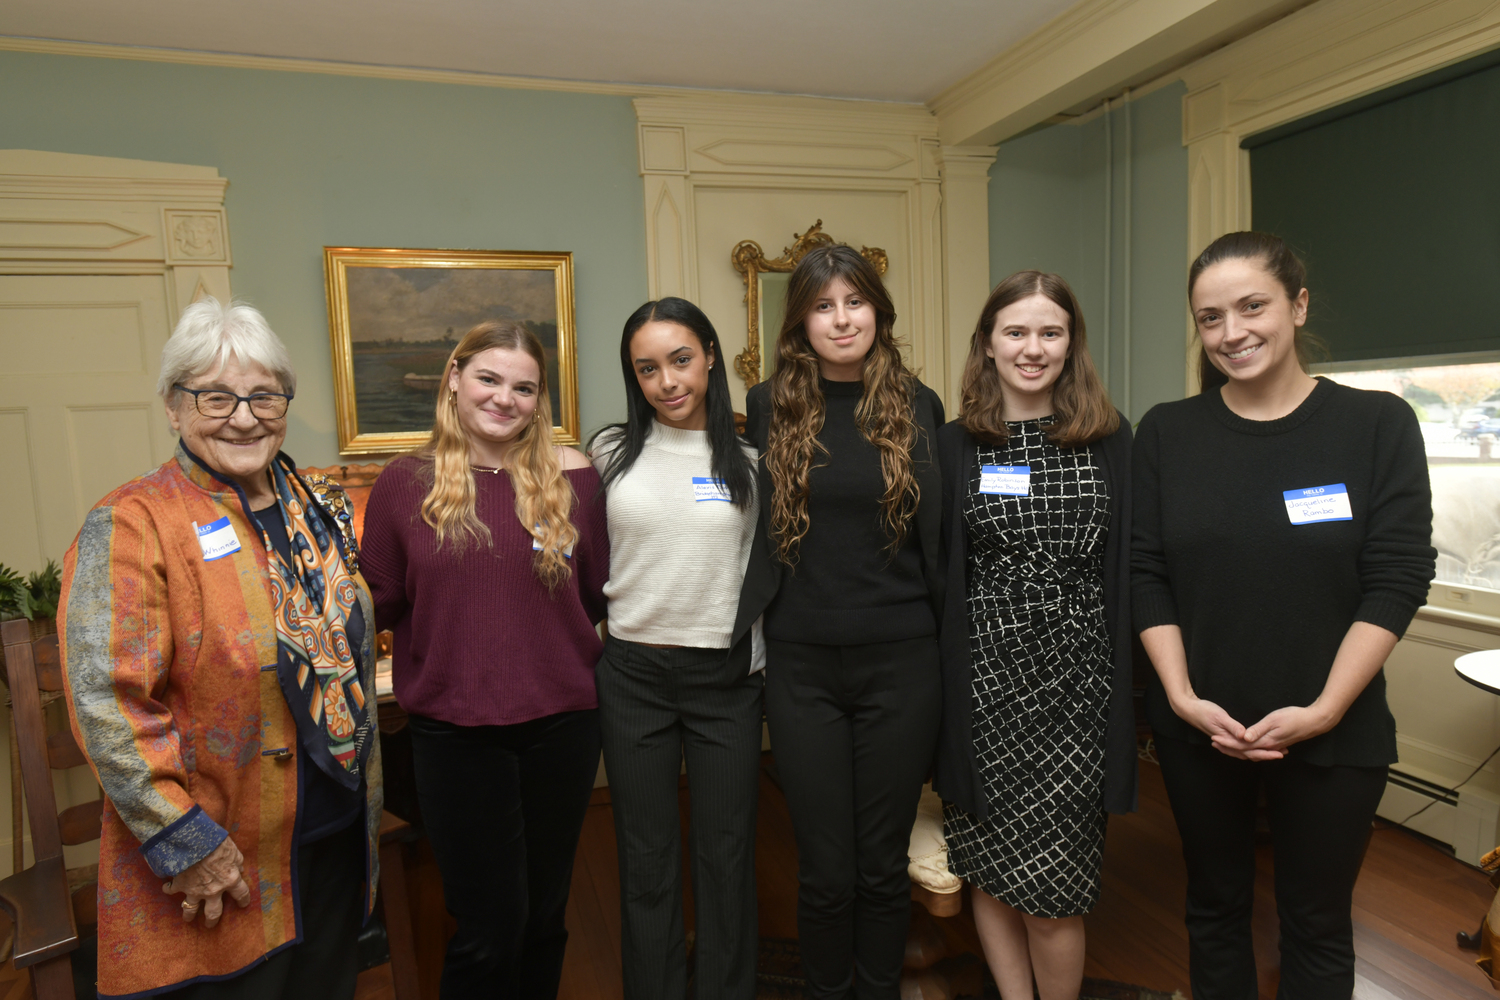 The Southampton Colony Chapter of the National Society of the Daughters of the American Revolution recently awarded local students with its Good Citizen Award. Left to right, Gerrie MacWhinnie, award chair, from Pierson High School, Caroline McGuire; Bridgehampton High School, Alexis Davis; Southampton High School, Rosary Krezalek; Hampton Bays, Emily Robinson;  and Southampton Colony Chapter NSDAR Regent Jacqueline Rambo.   DANA SHAW